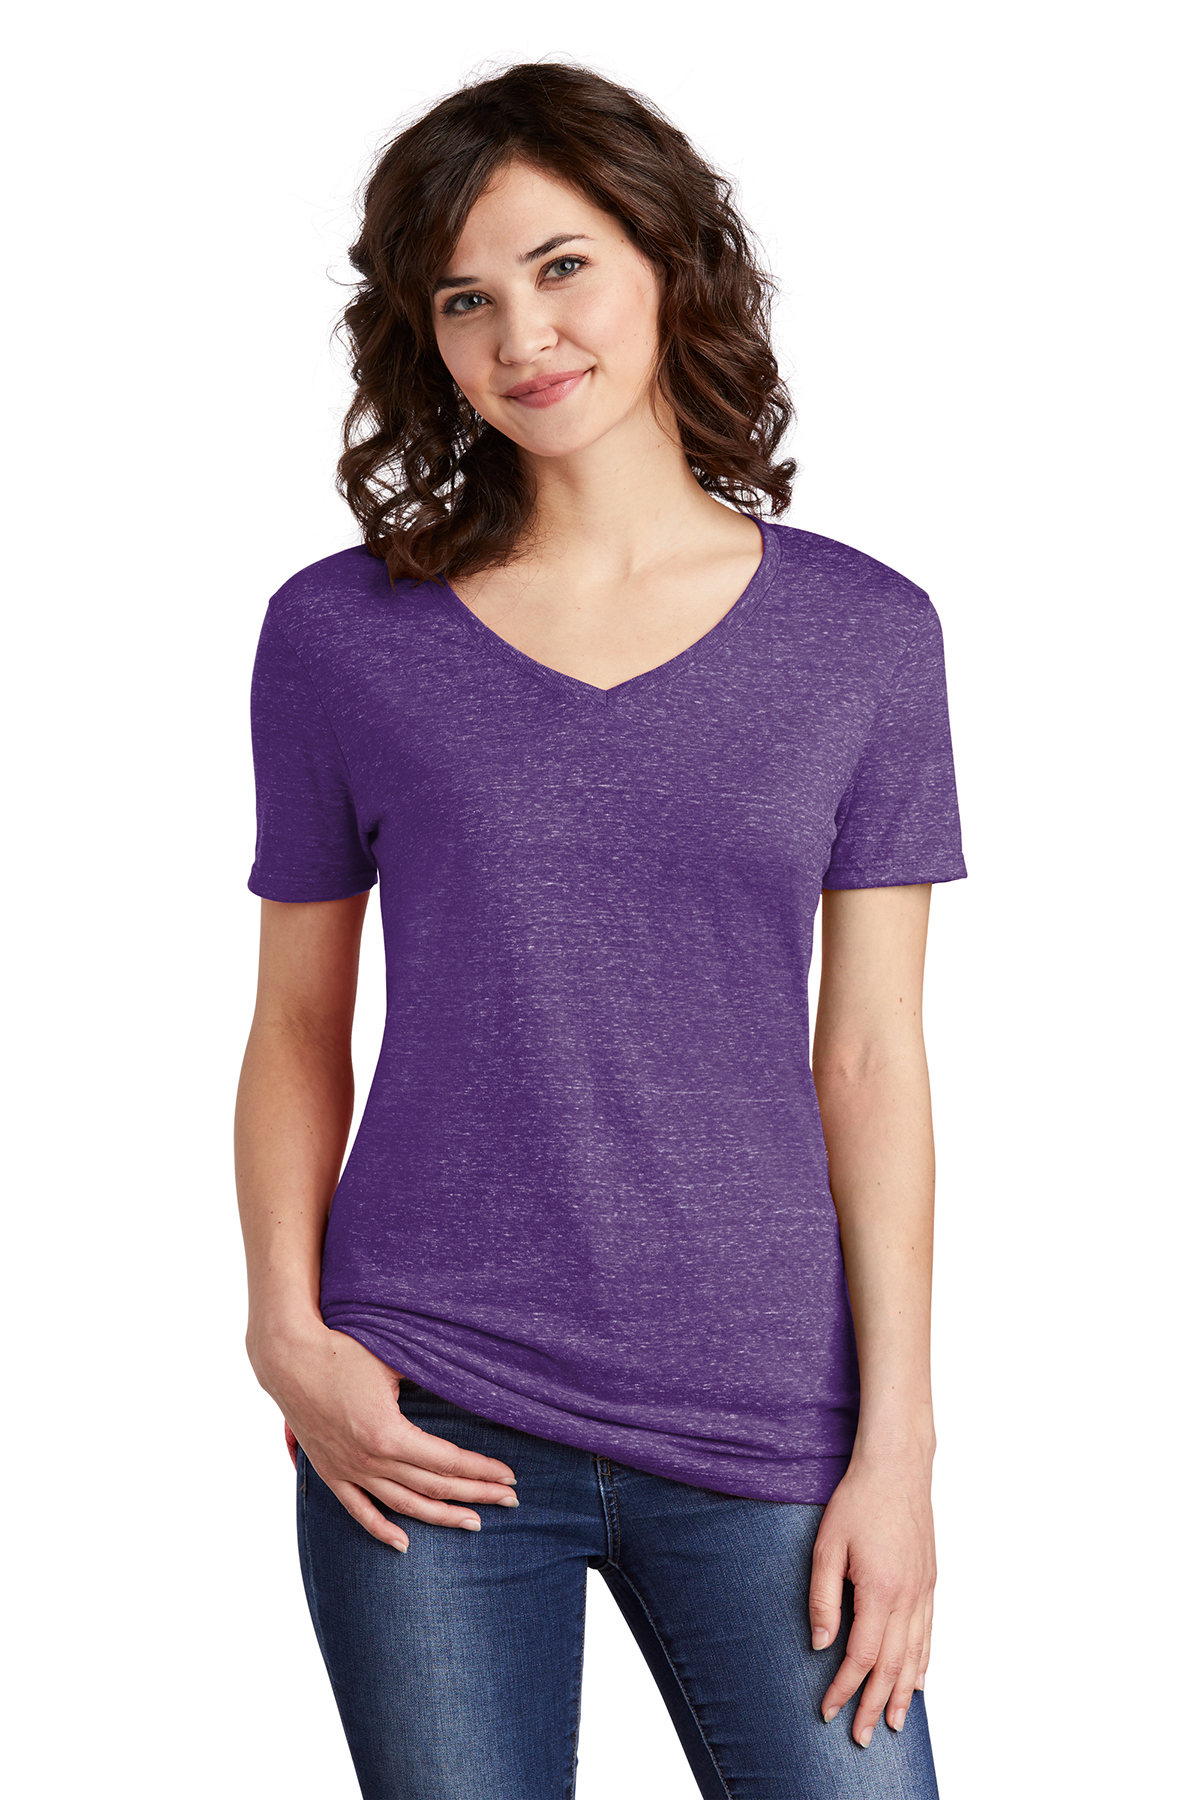 Jerzees Ladies Snow Heather Jersey V-Neck T-Shirt, Product